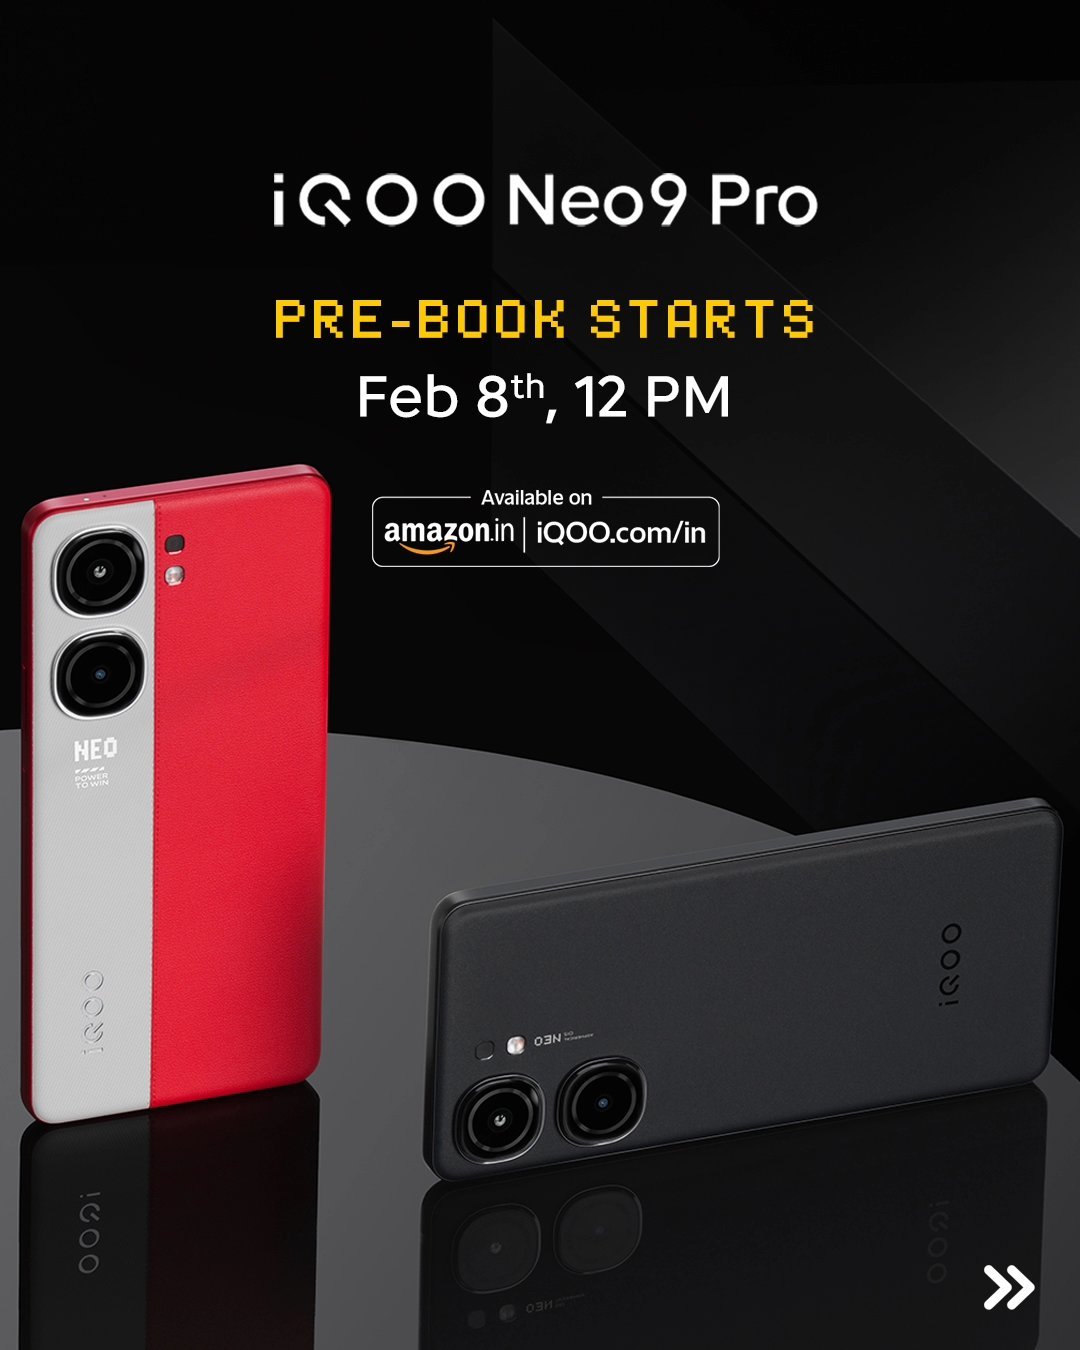 iQOO Neo 9 Pro Pre-Bookings To Start From February 8th Ahead of Launch: